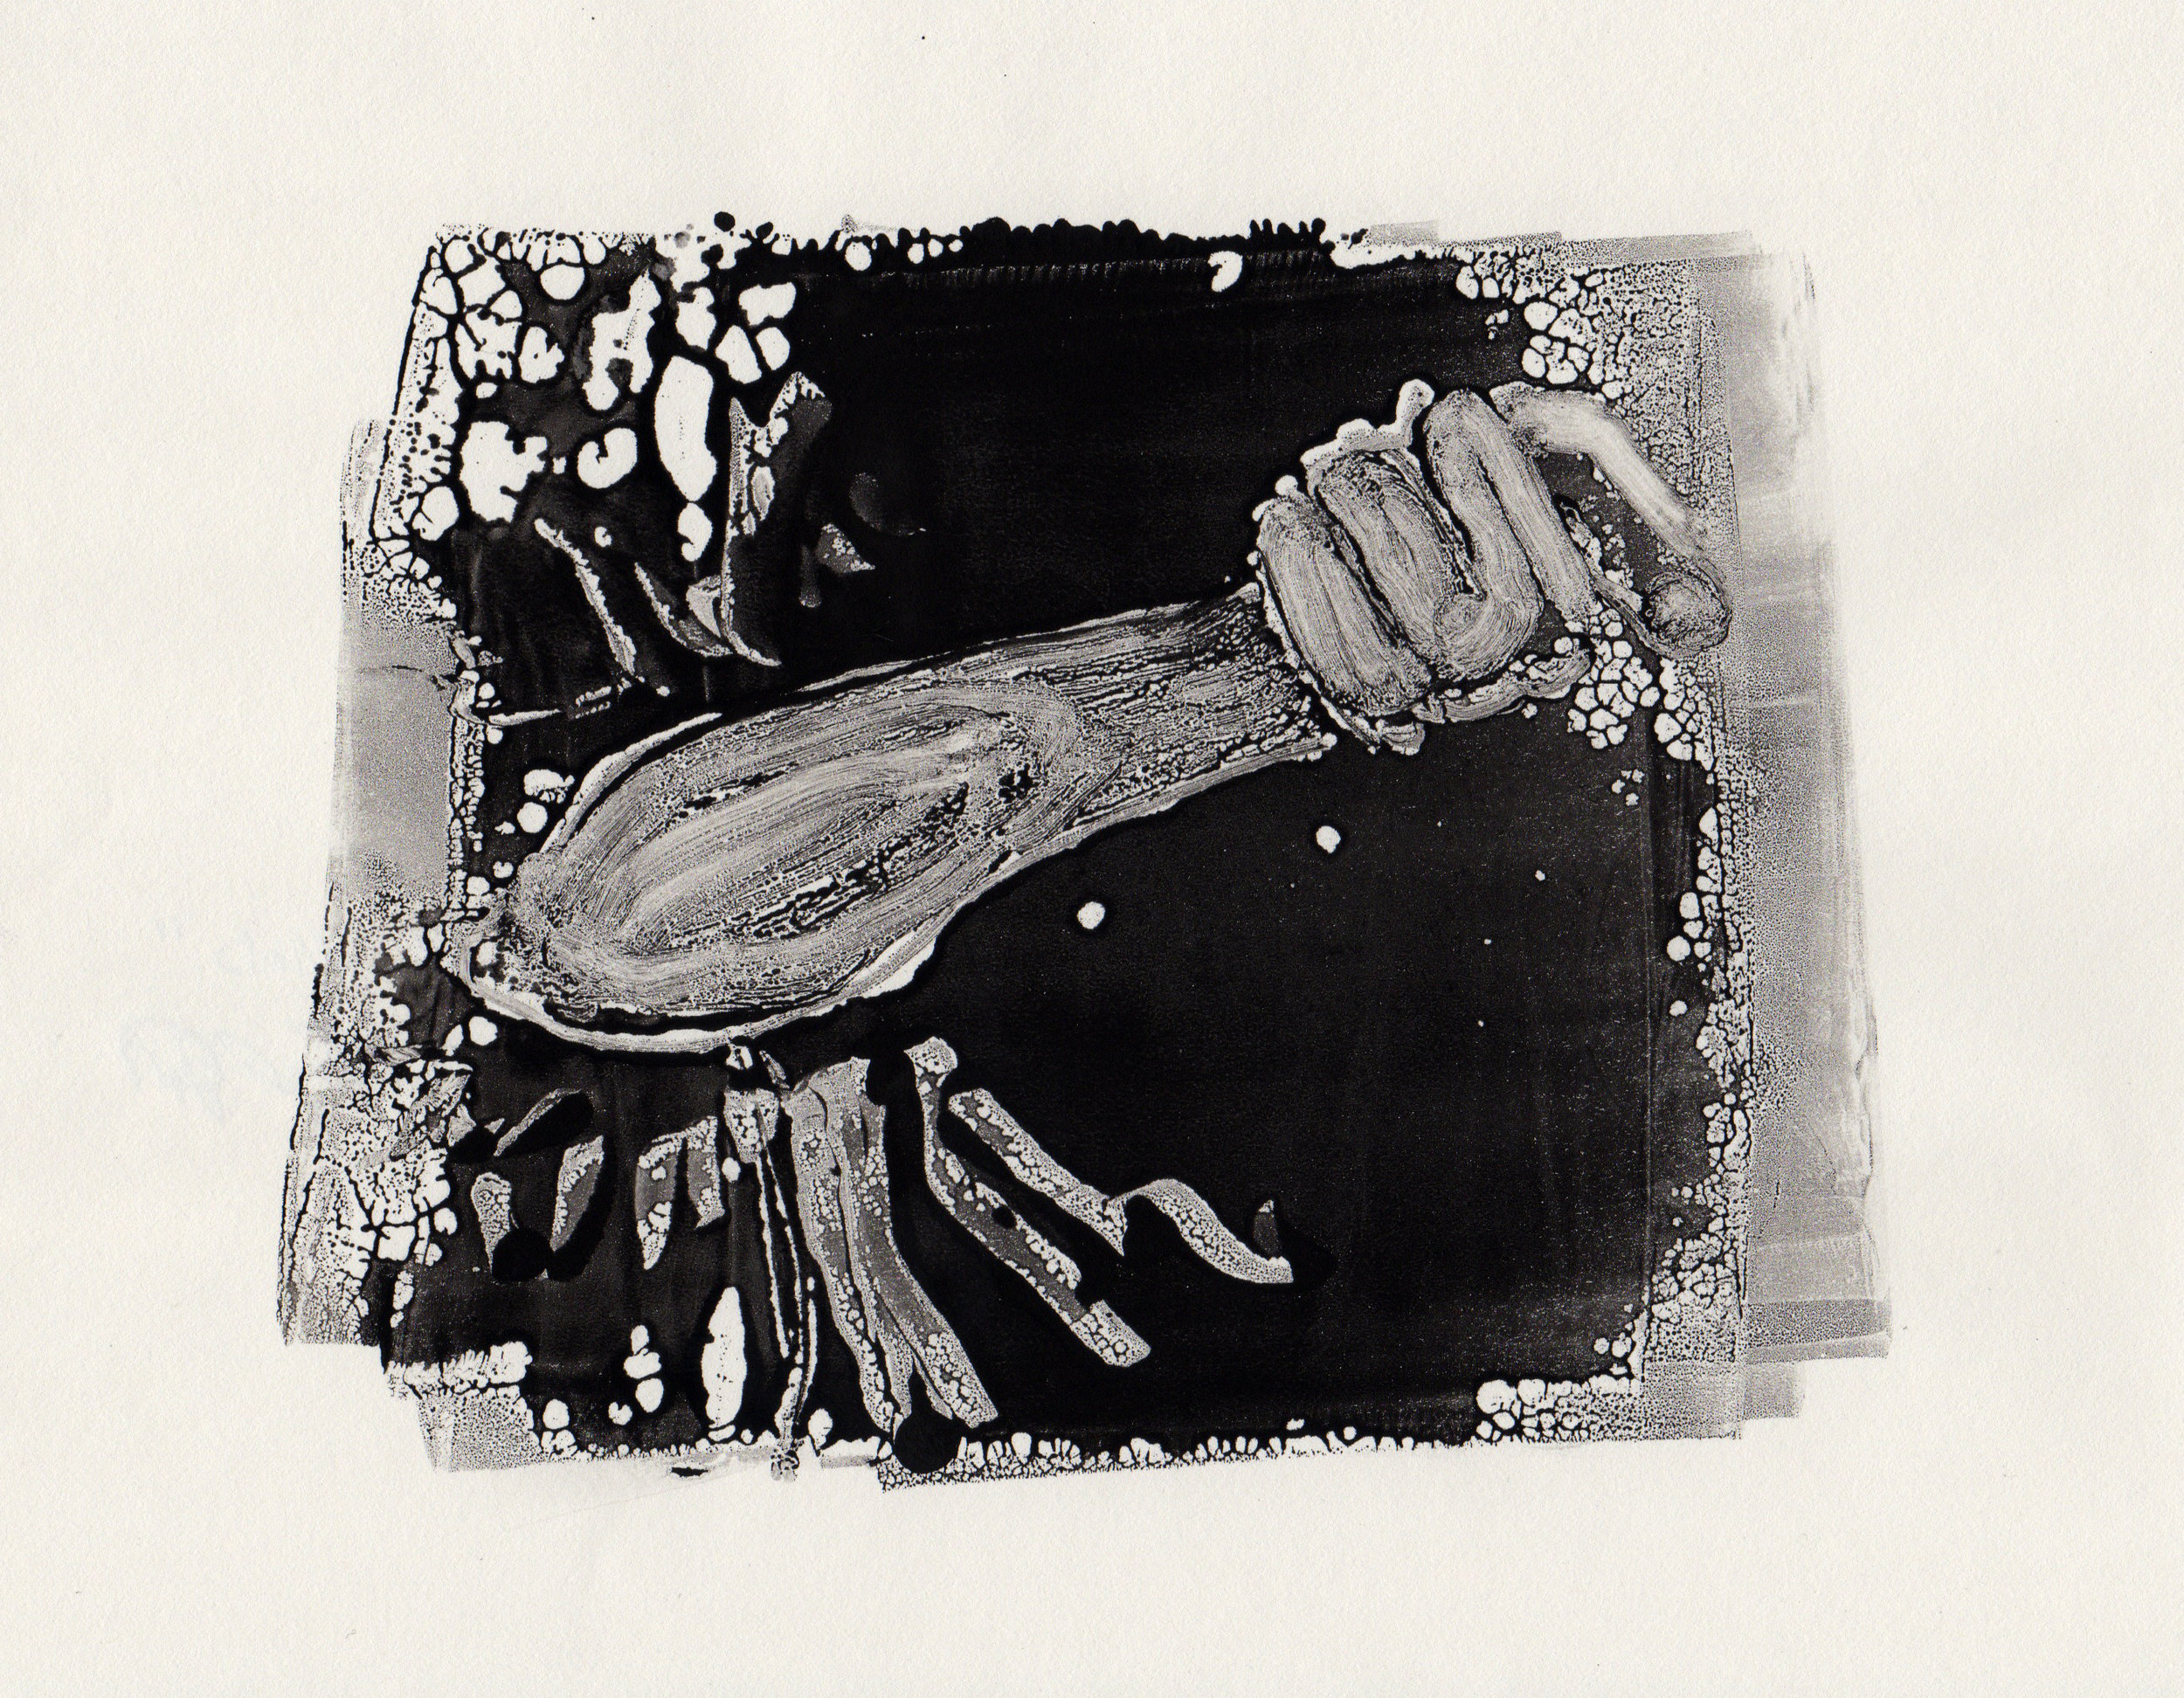 Punching the Wind, 2014, gelatin monotype, 10x9 inches